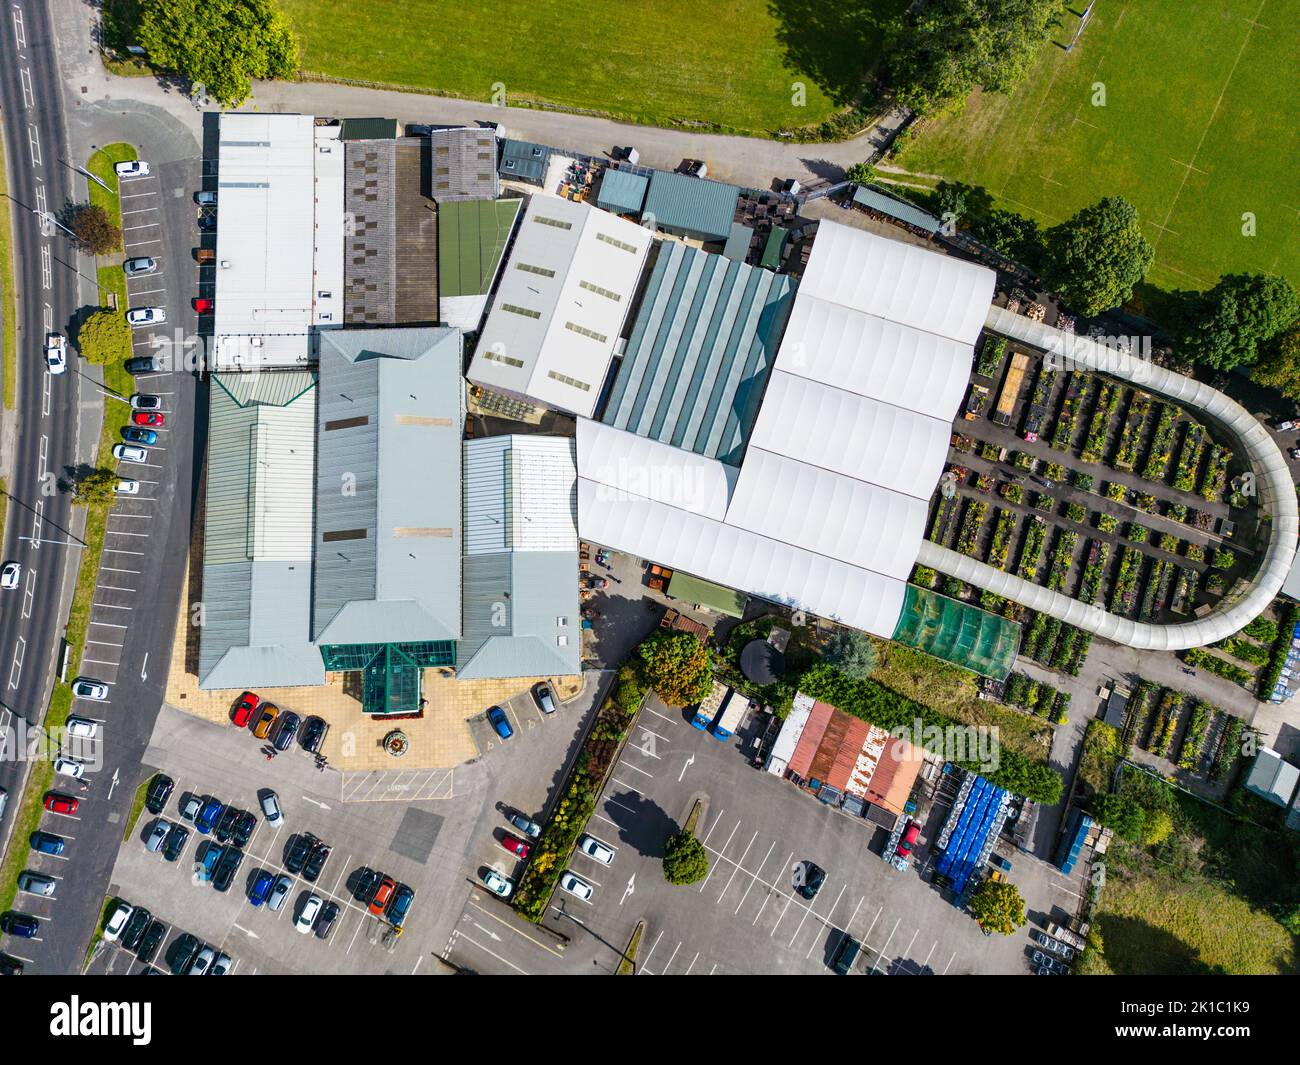 Aerial view of a garden centre, Otley, West Yorkshire. Stephen Smith's garden centre a plant nursery and crafts shop. Stock Photo